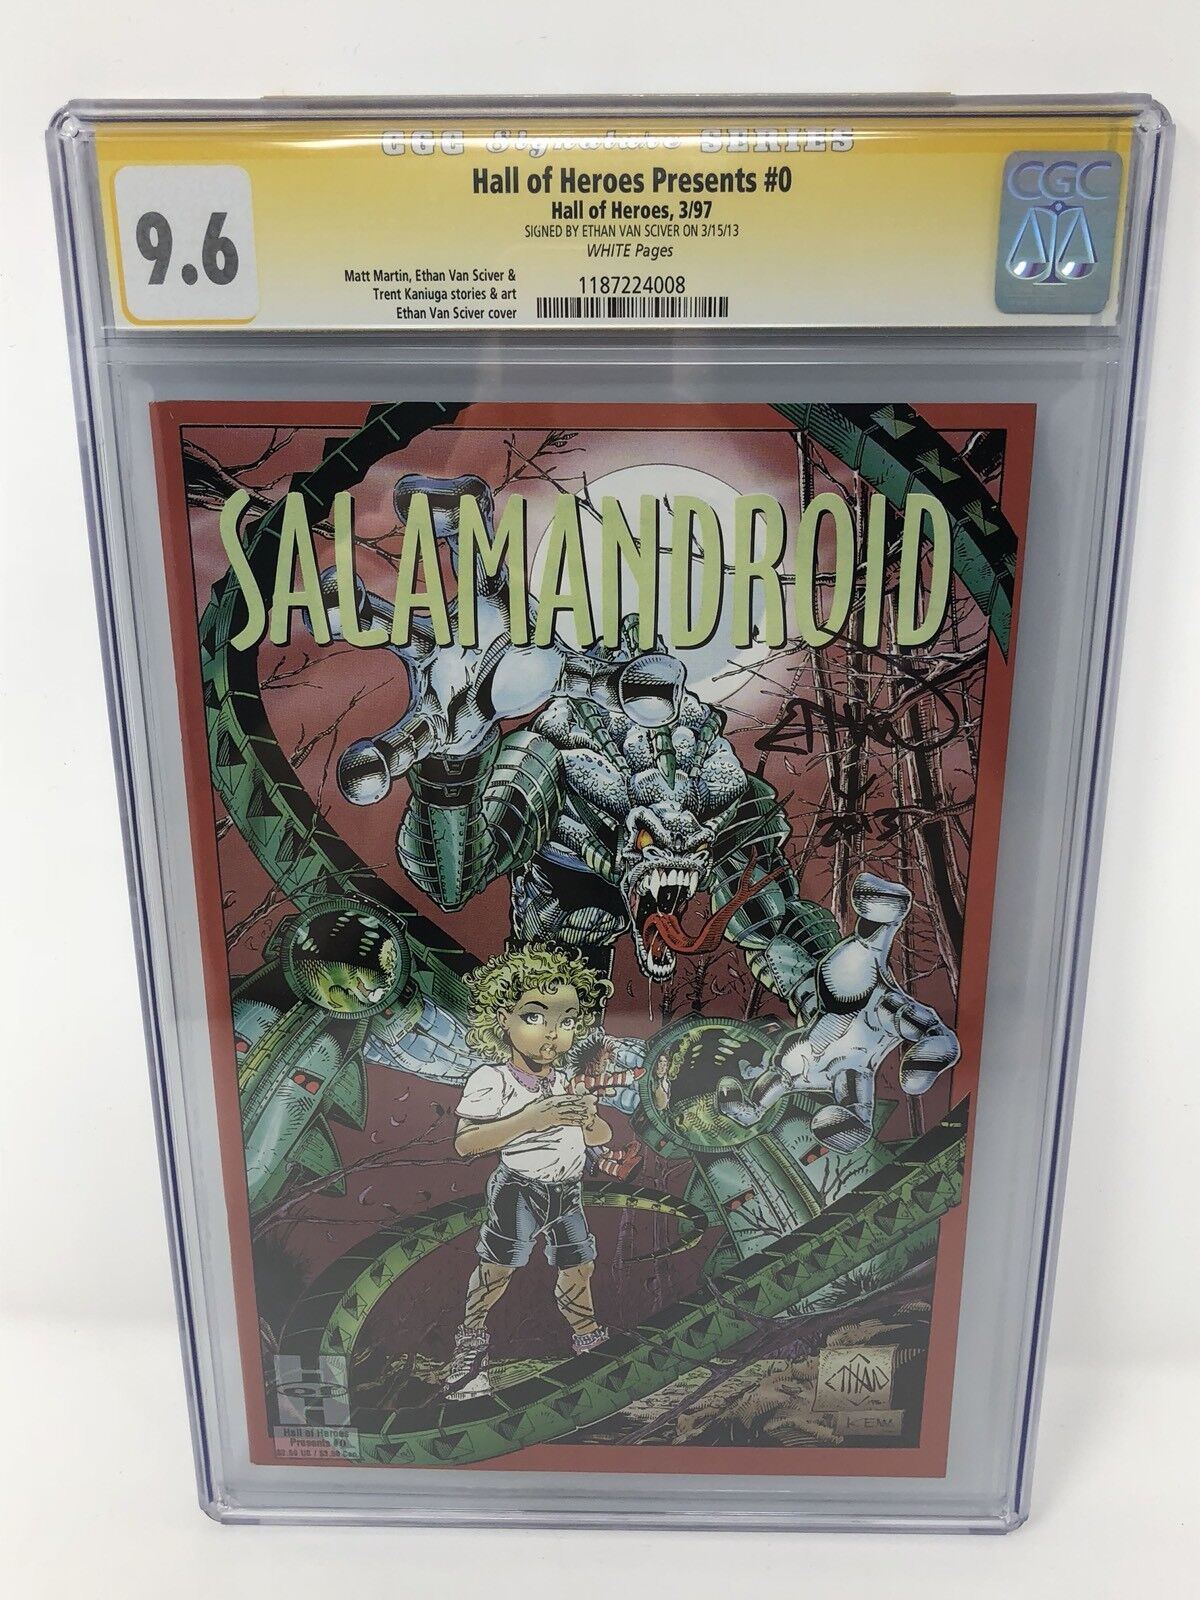 Hall Of Heroes Presents #0 Salamandroid Ethan Van Sciver CyberFrog CGC SS 9.6